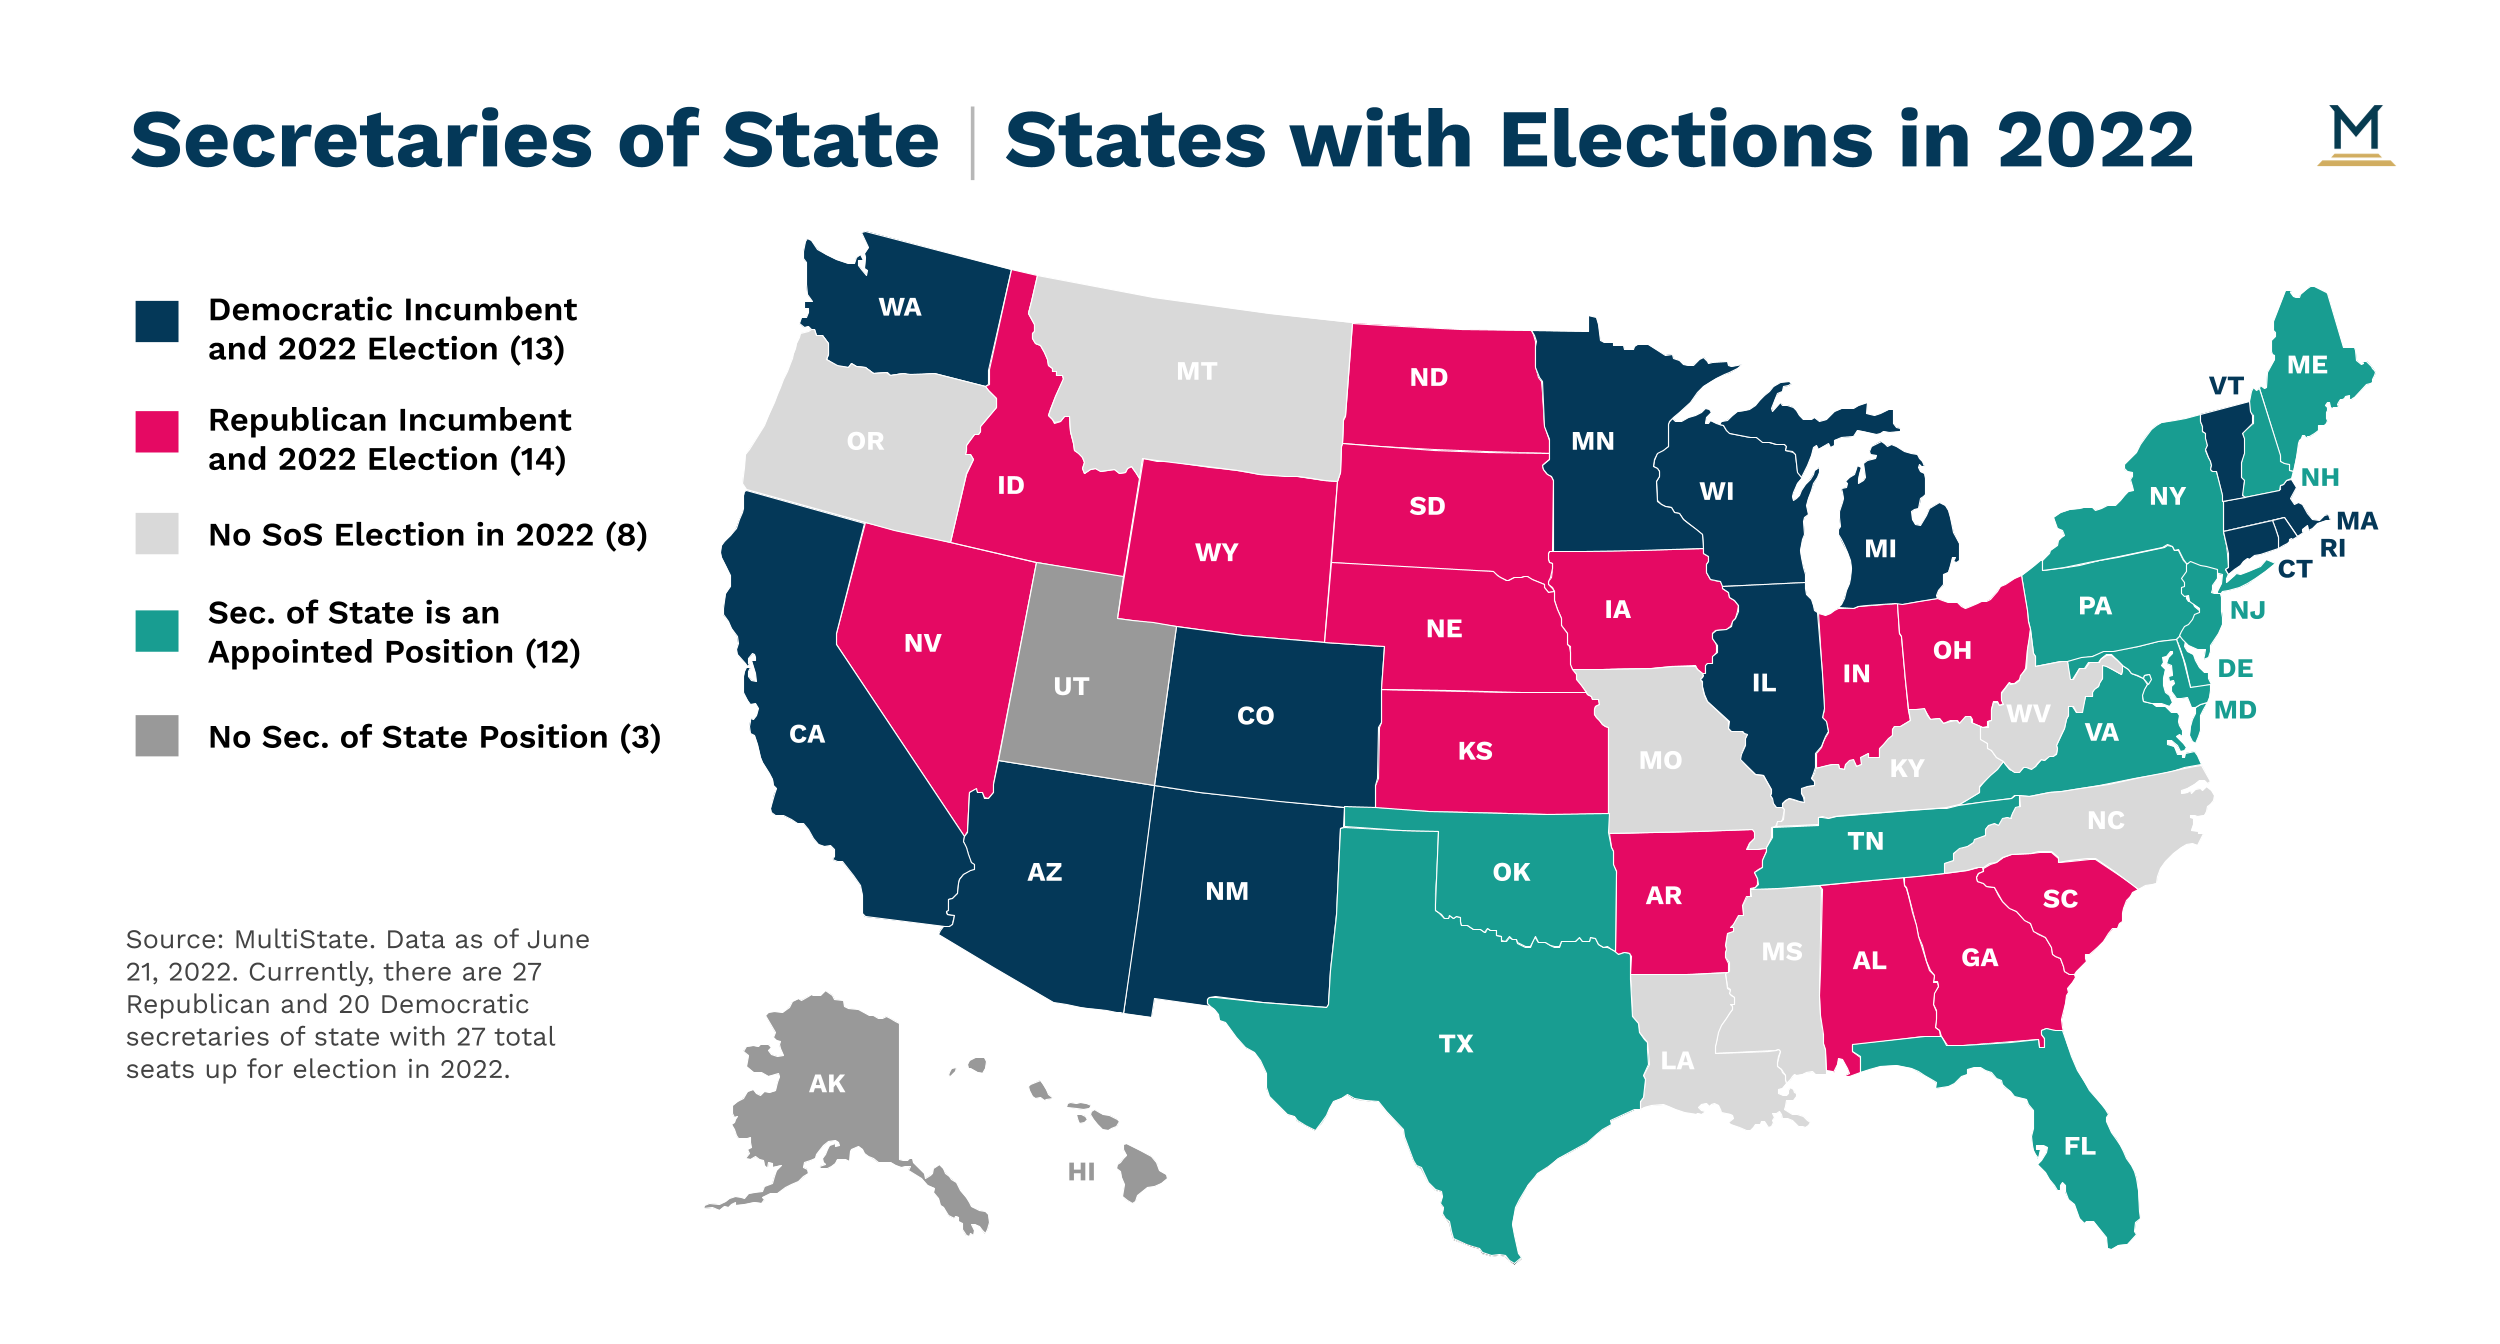 2022-elections-secretaries-of-state-multistate